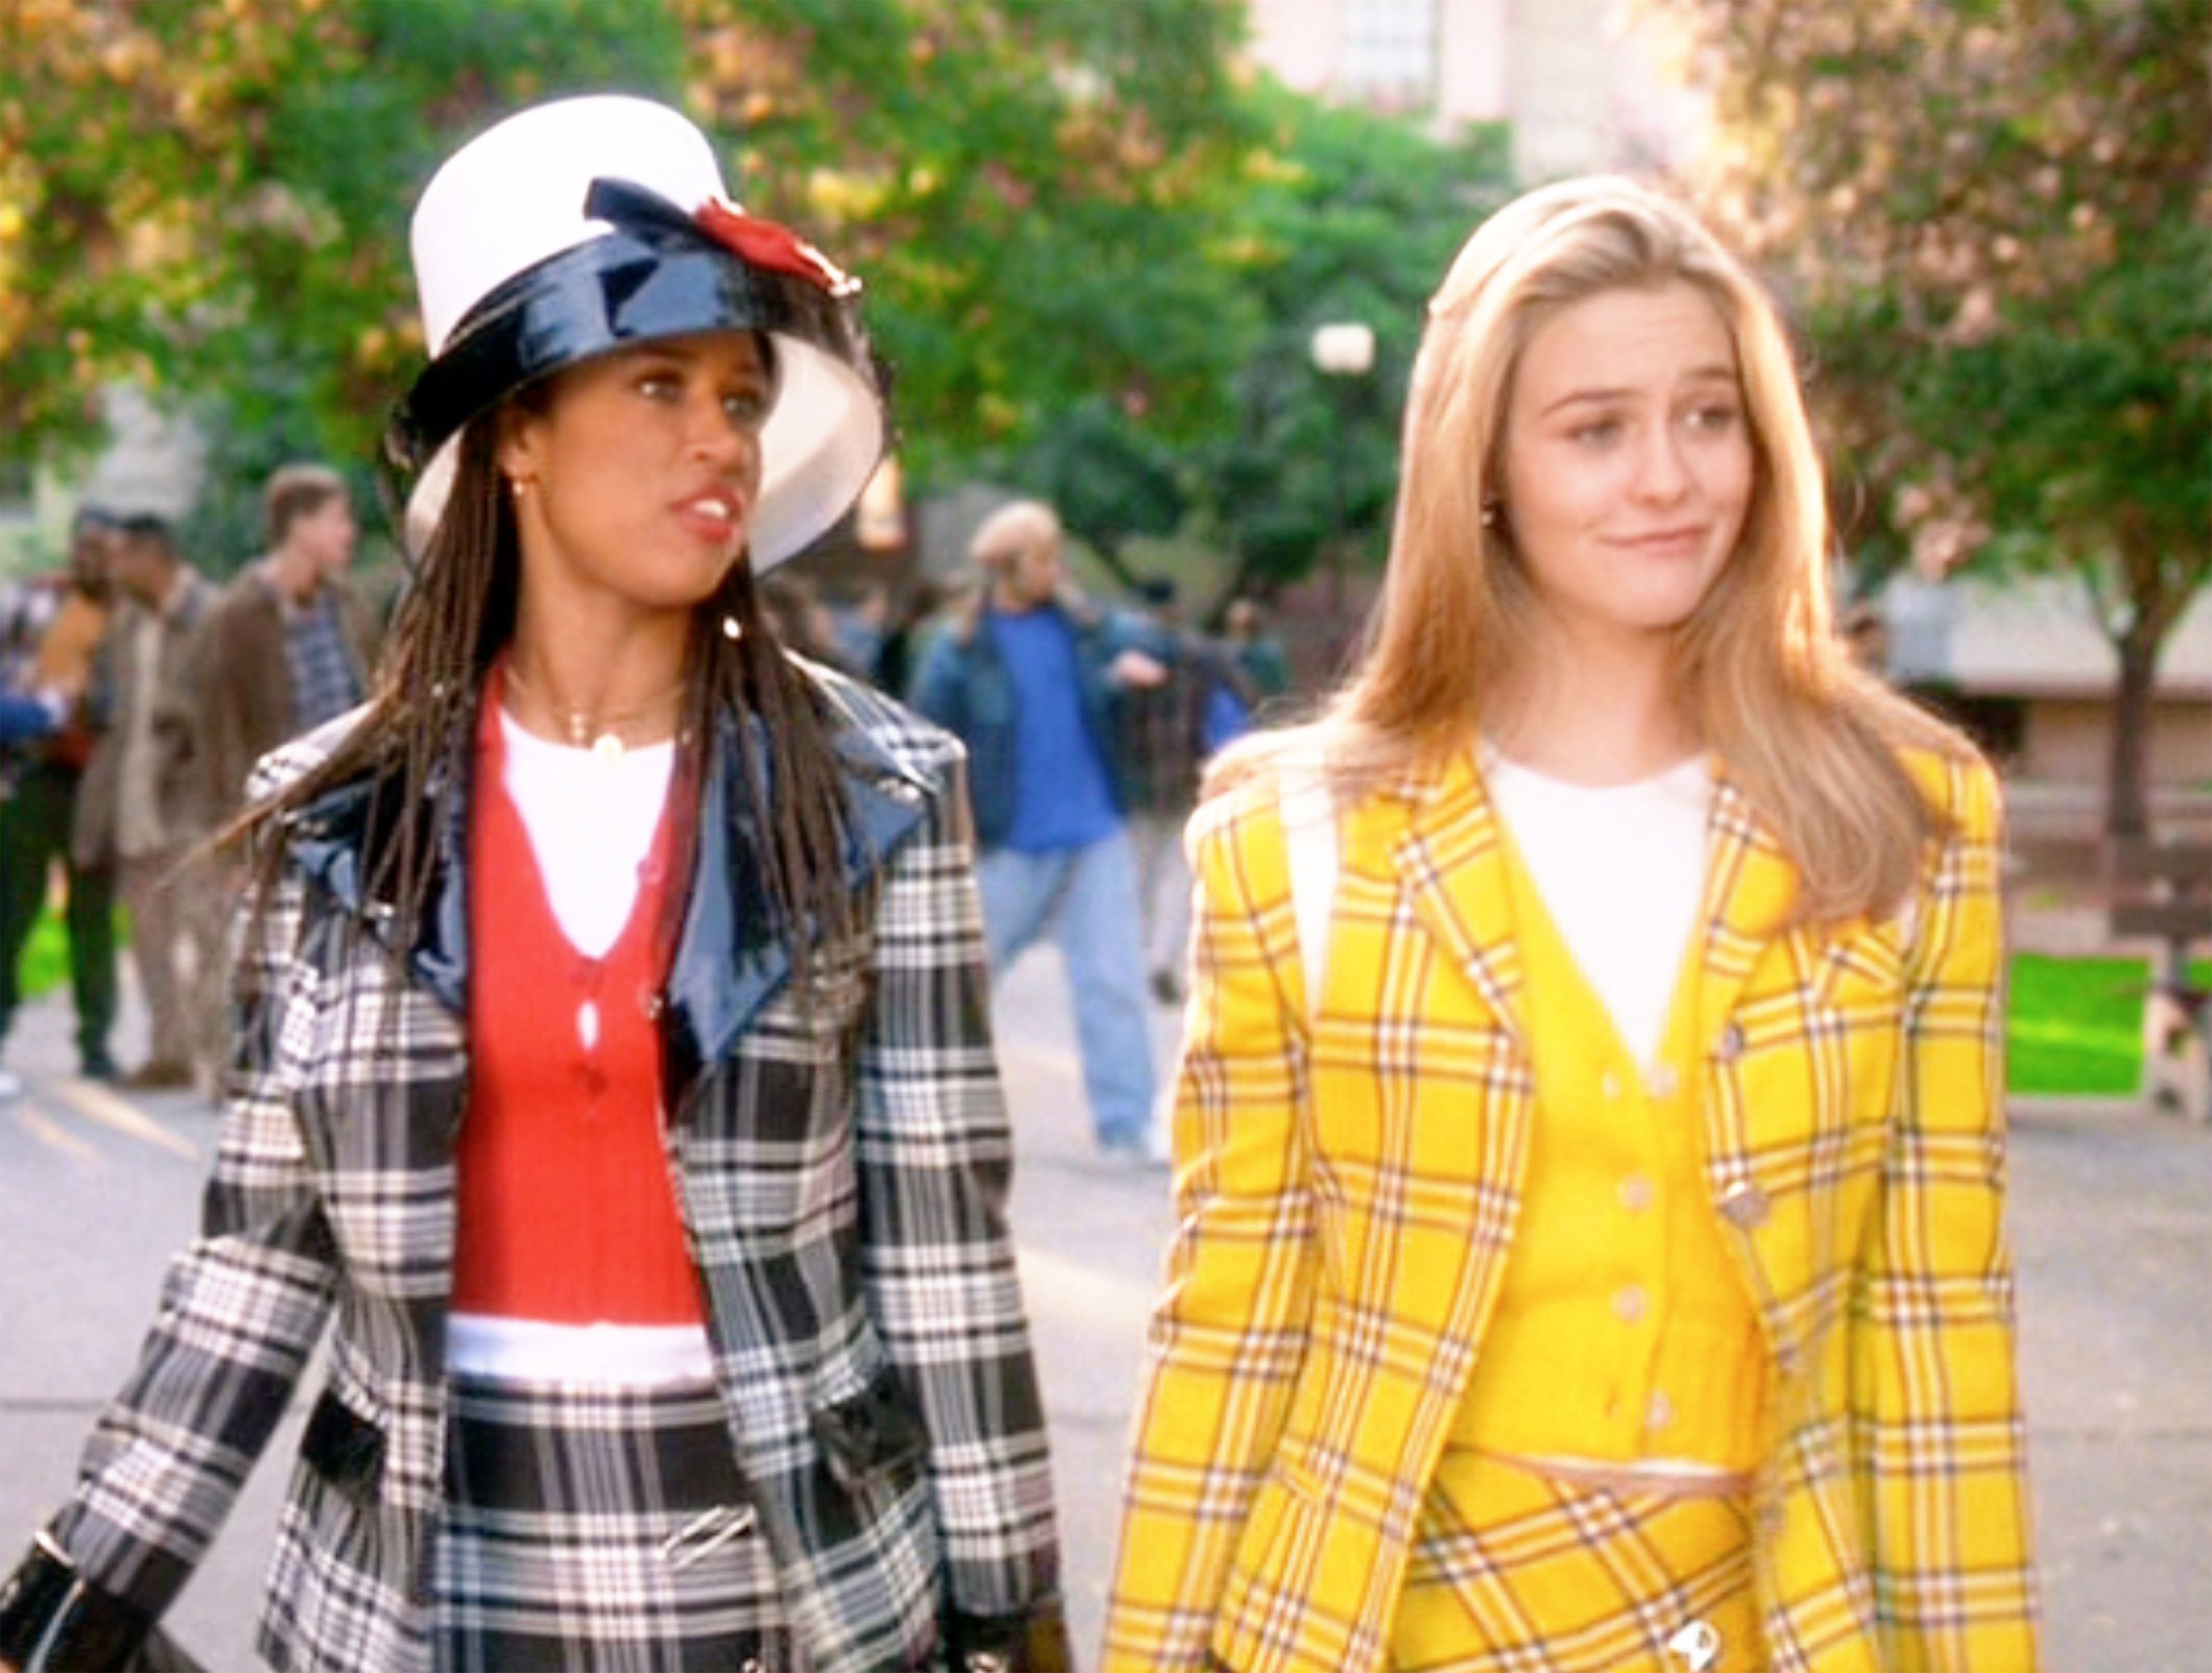 Christian Siriano Redesigns Cher's Iconic Yellow Plaid Outfit from Clueless  for a Super Bowl Ad